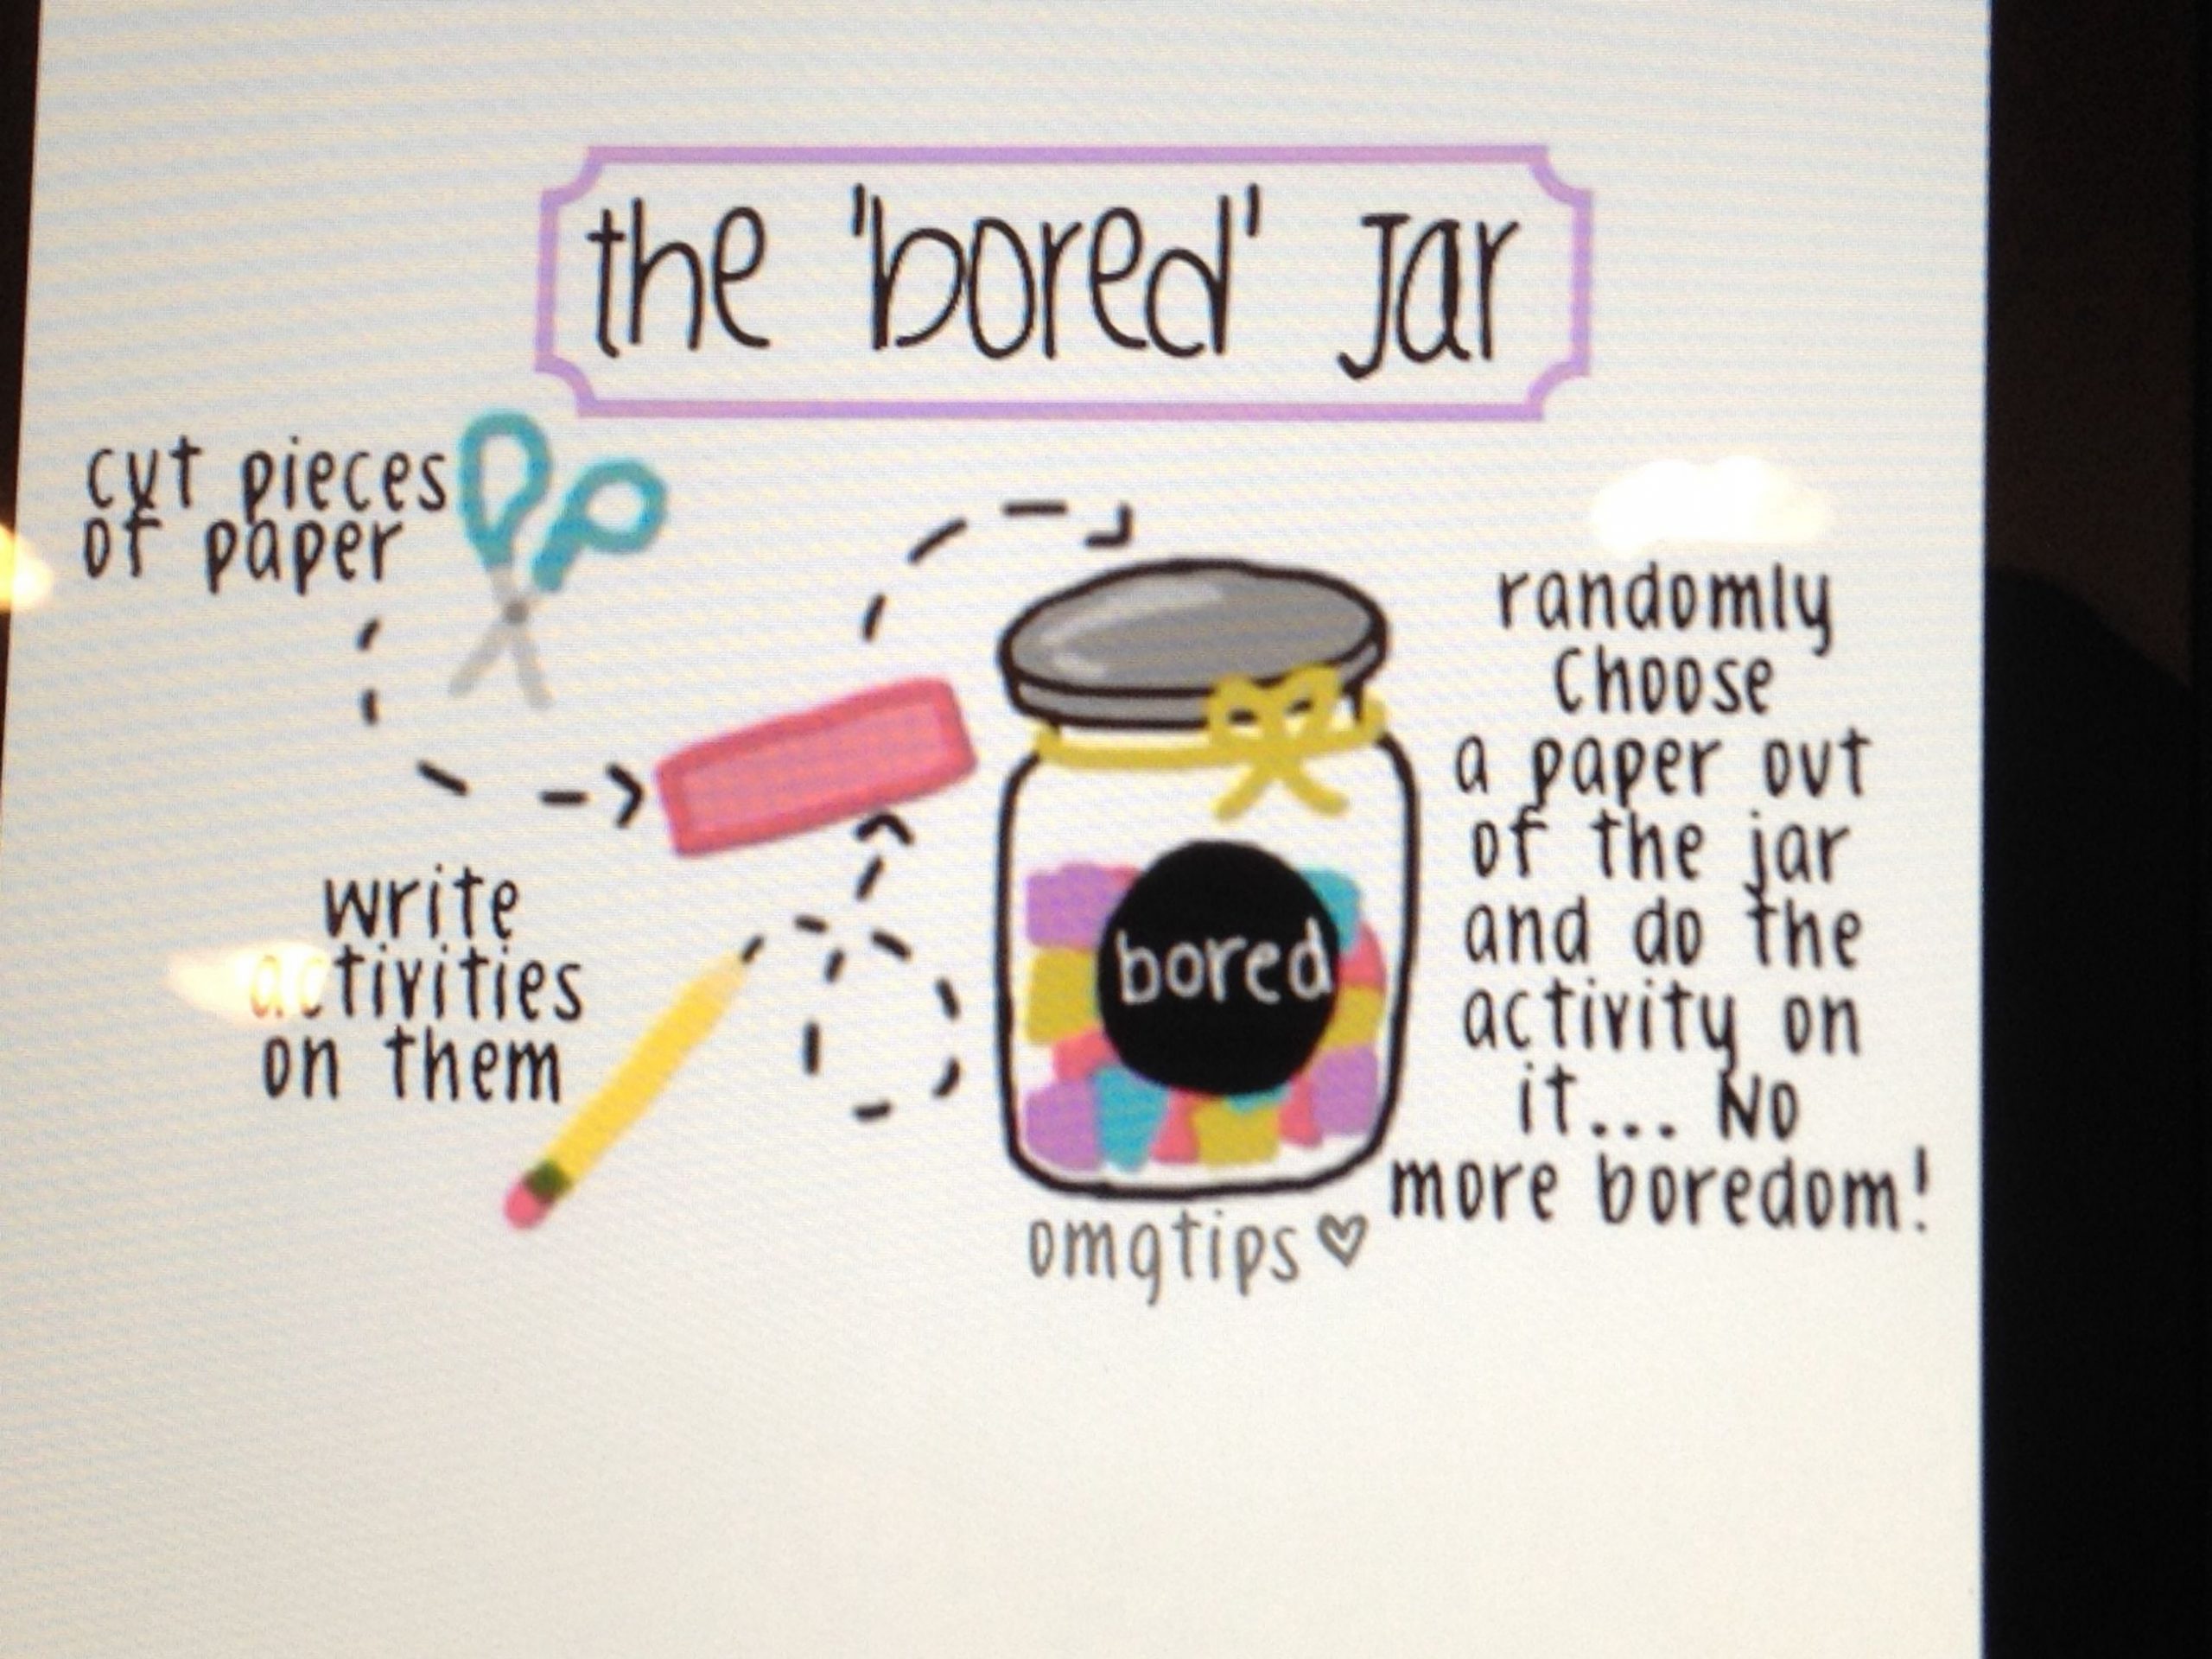 Wonderful Diy Things To Do When Bored